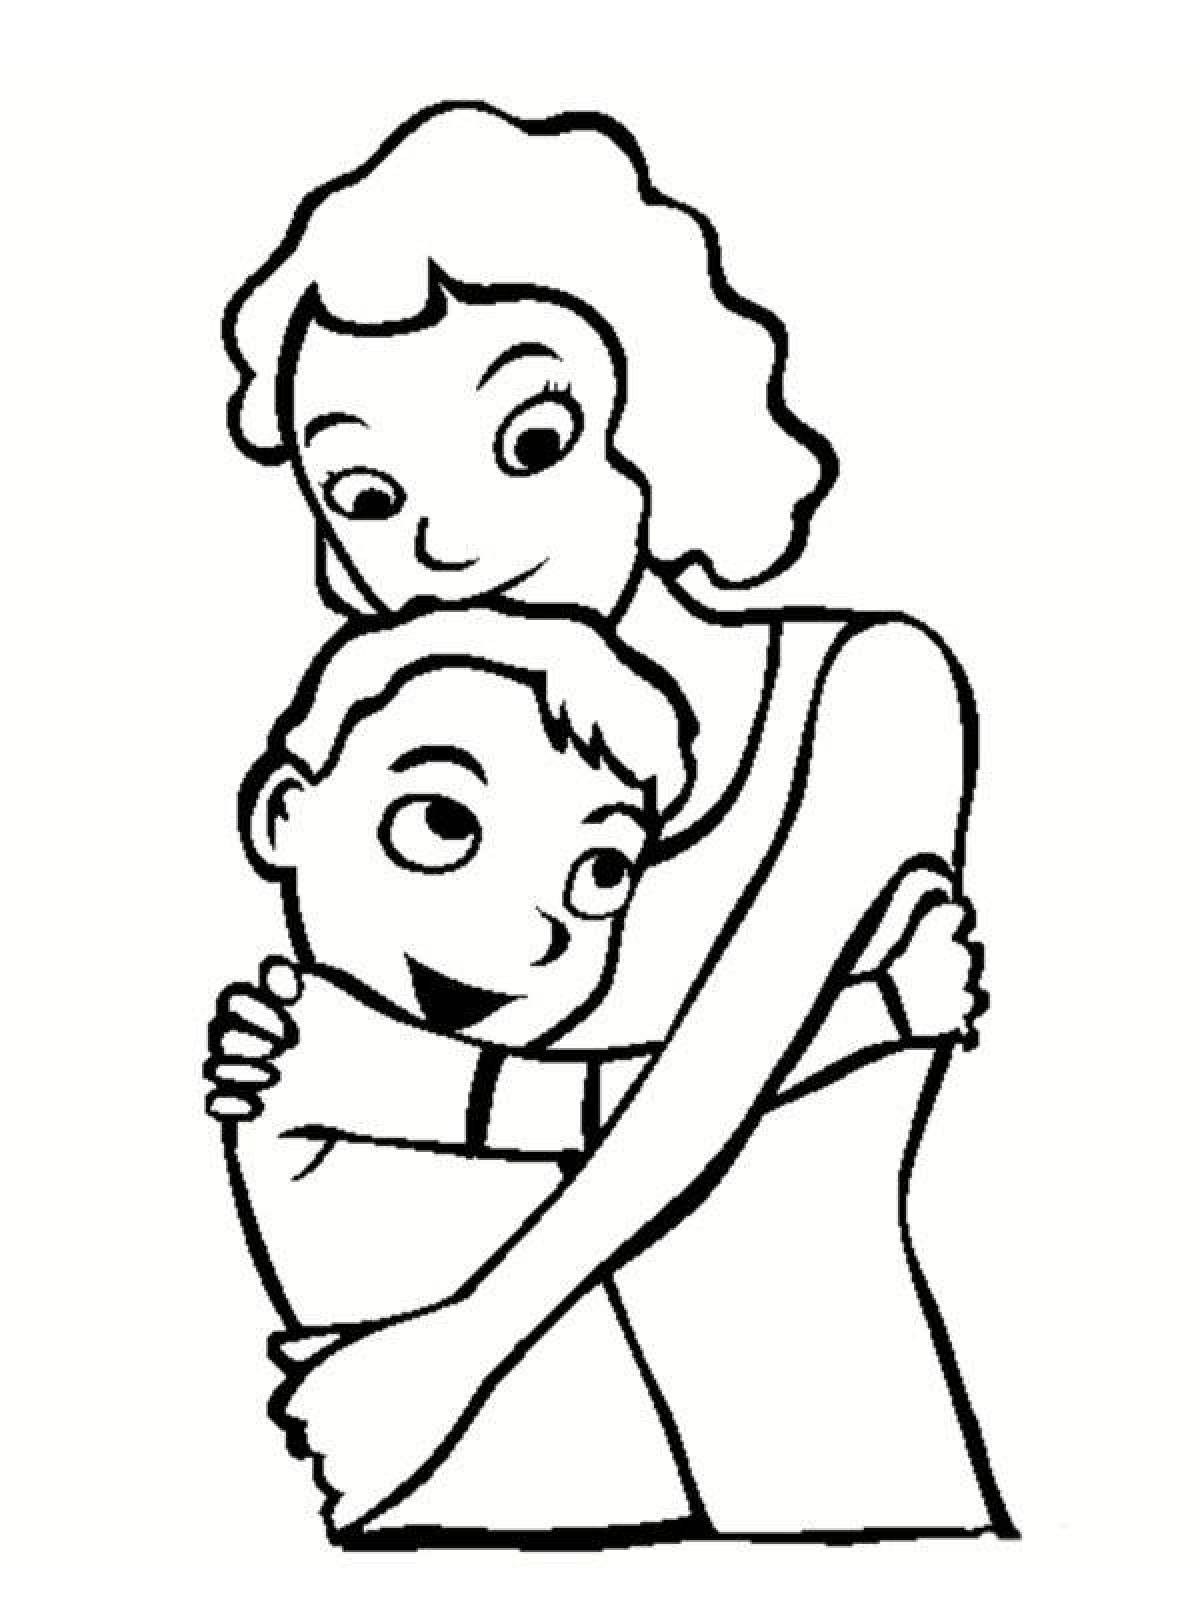 Glorious mother coloring page